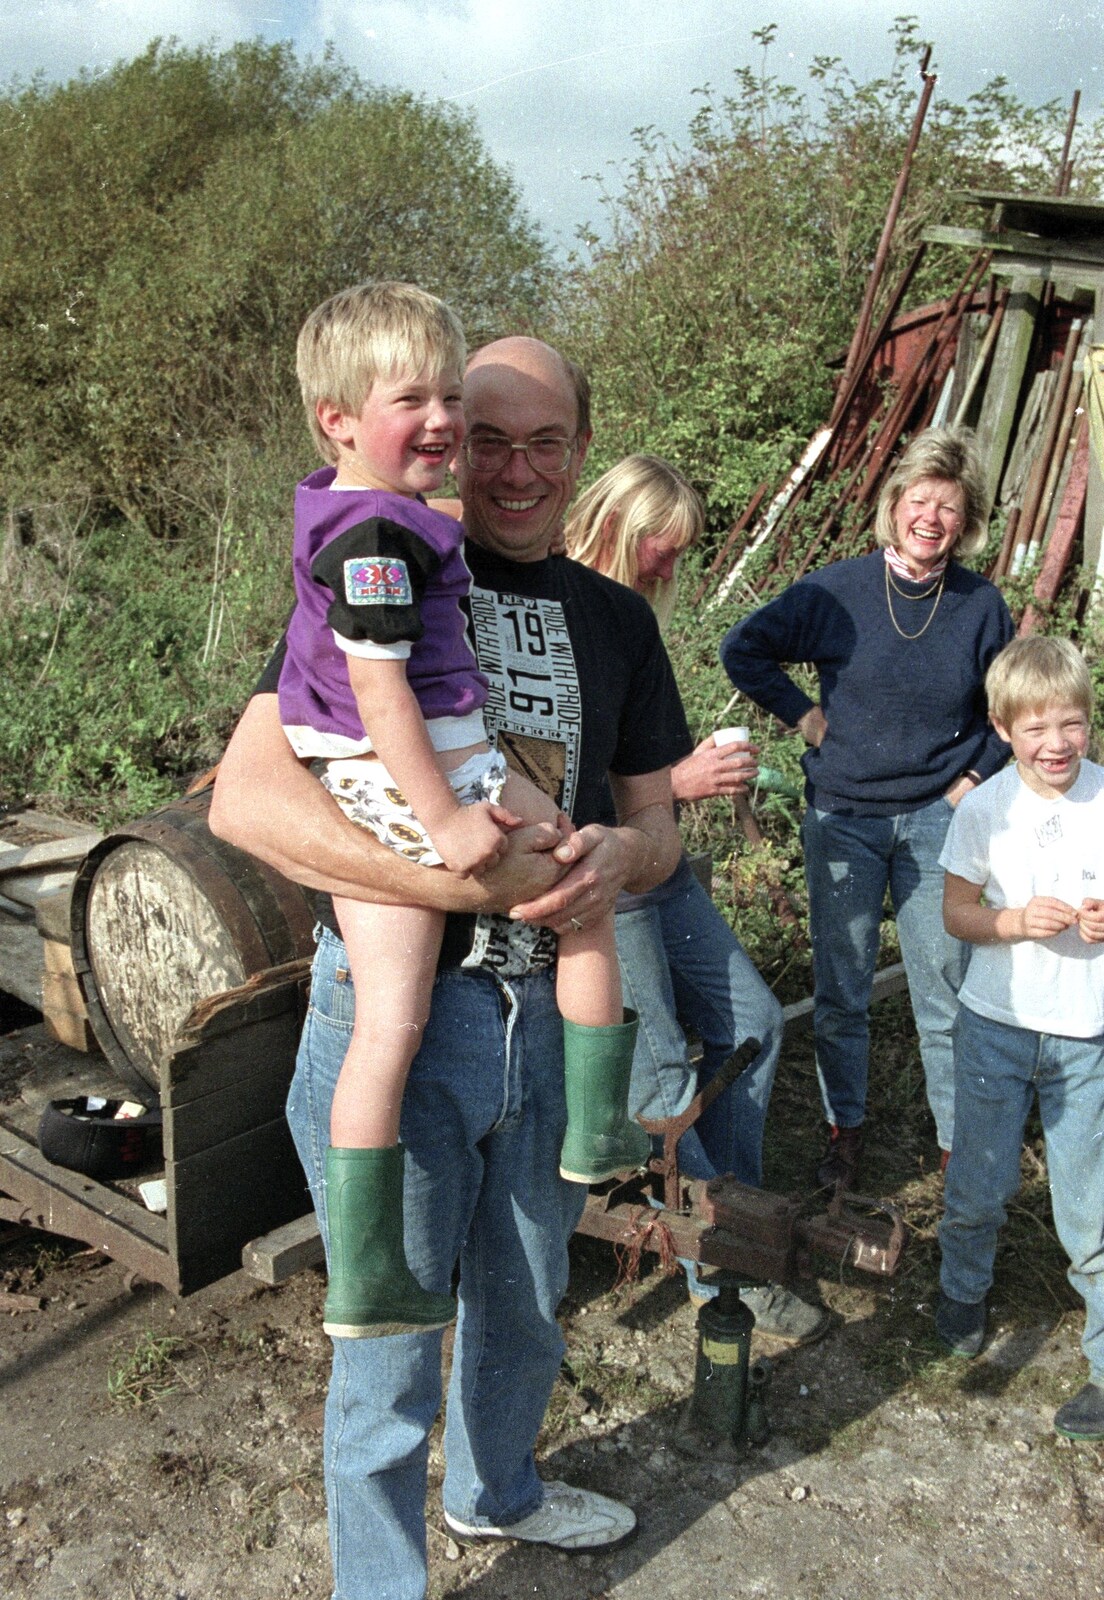 John Chapman and George from Cider Making, Stuston, Suffolk - 14th October 1991